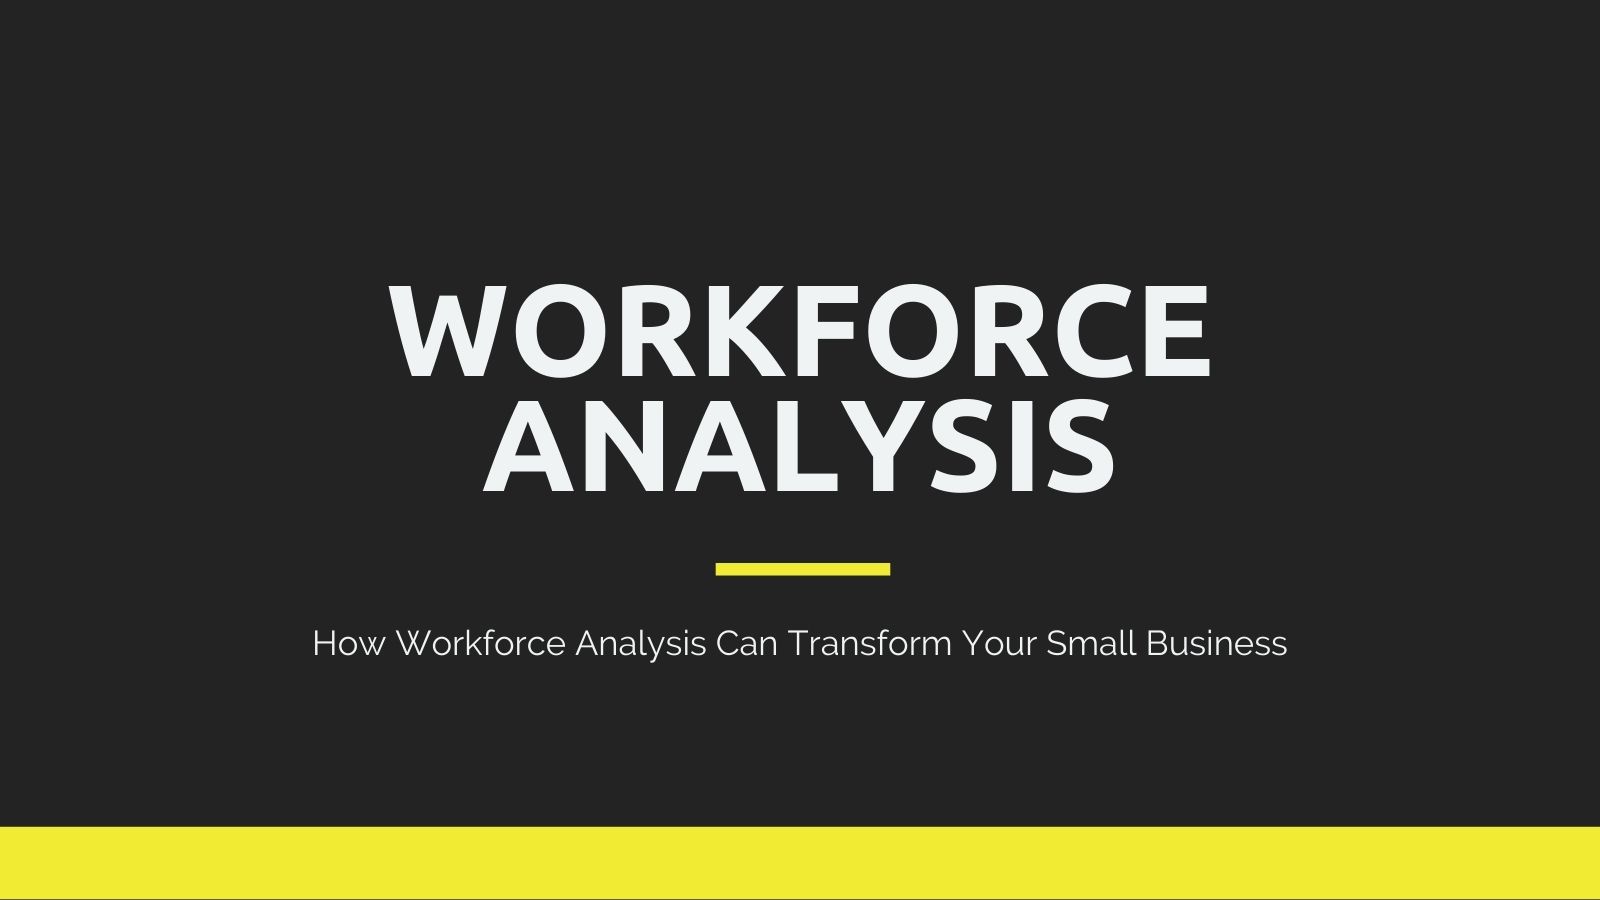 How Workforce Analysis Can Transform Your Small Business